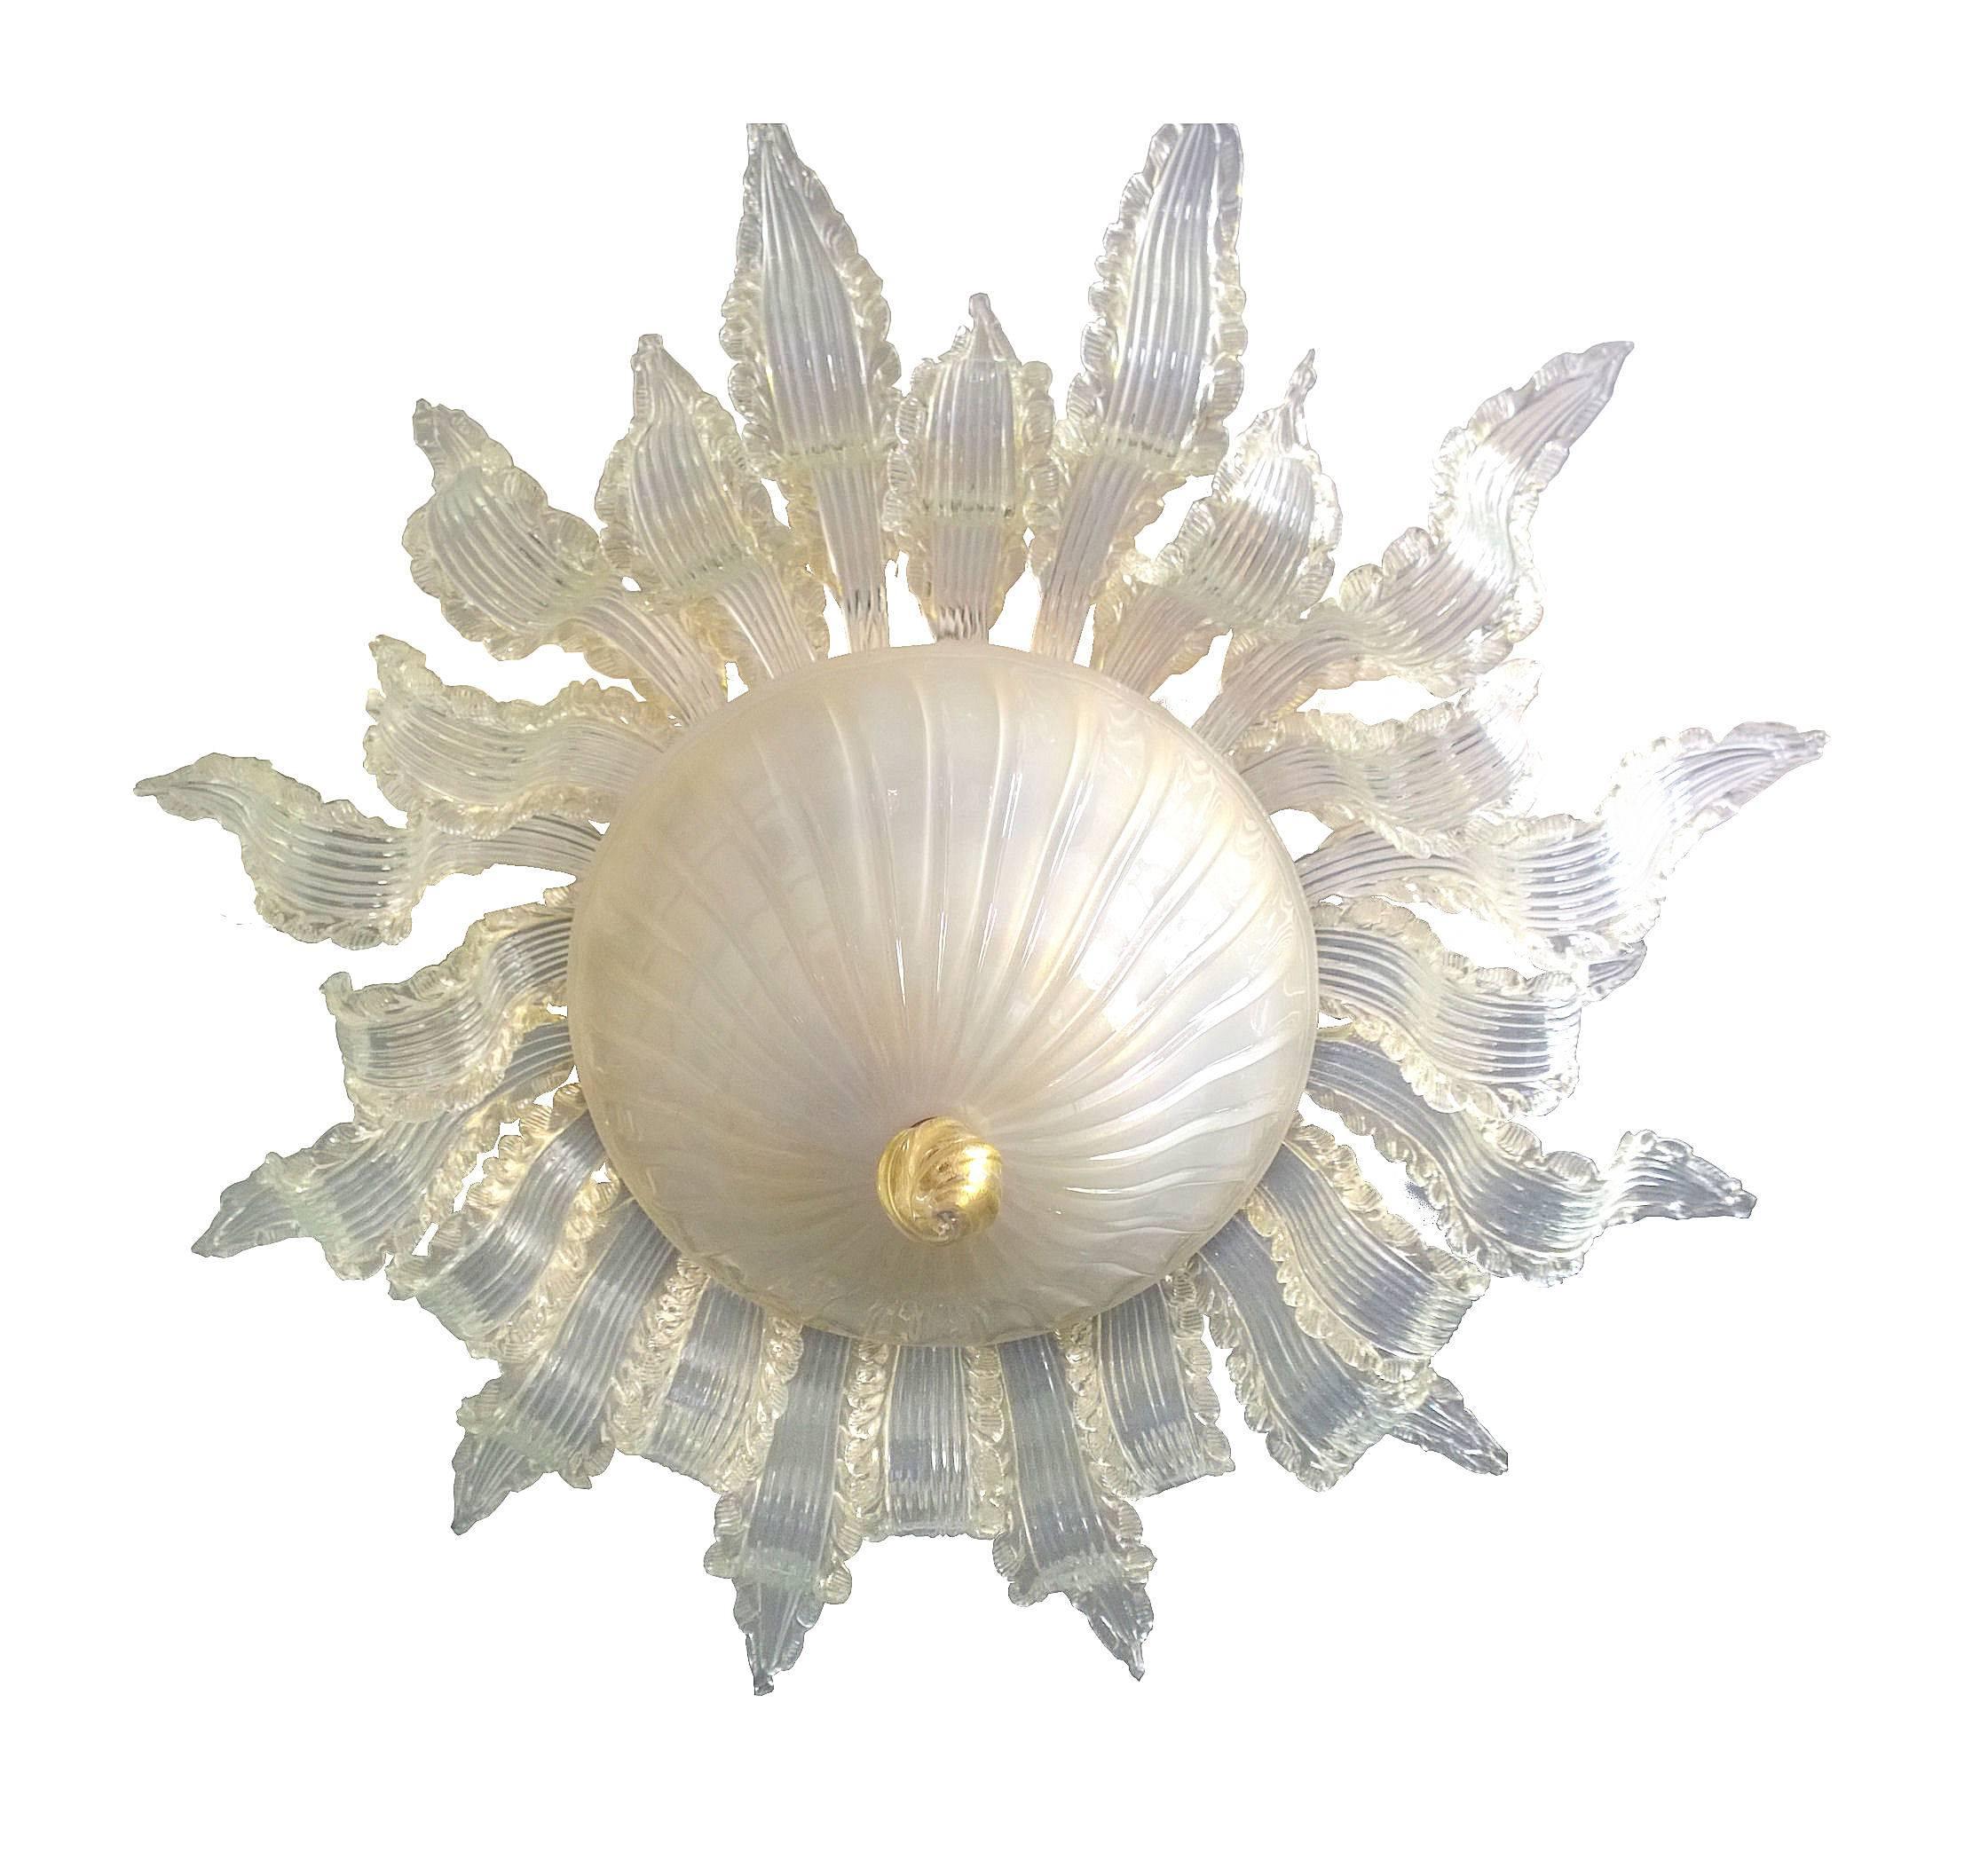 Murano chandelier by Ercole Barovier, circa 1940.  Inverted dome of translucent white glass surrounded by hand fashioned leaves of clear Murano glass radiating from the center dome.  The finial at the bottom of the fixture is gold flecked Murano